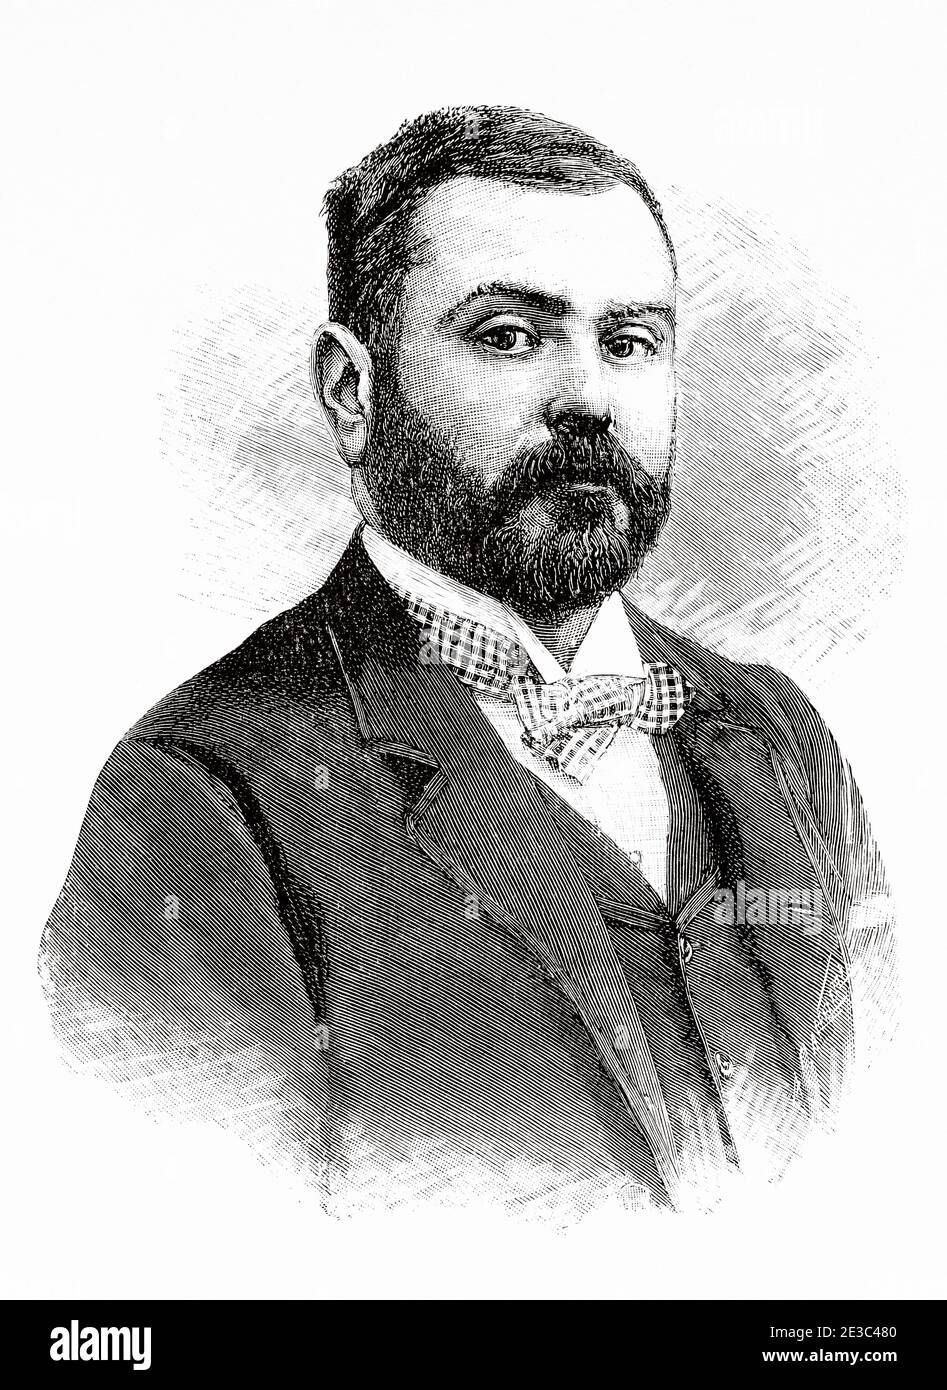 Portrait of Joaquim Pedro de Oliveira Martins (Lisbon 1845 - Lisbon 1894) Portuguese historian and politician, and one of the dominant intellectuals of the last quarter of the 19th century in Portugal. Old XIX century engraved illustration from La Ilustracion Española y Americana 1894 Stock Photo